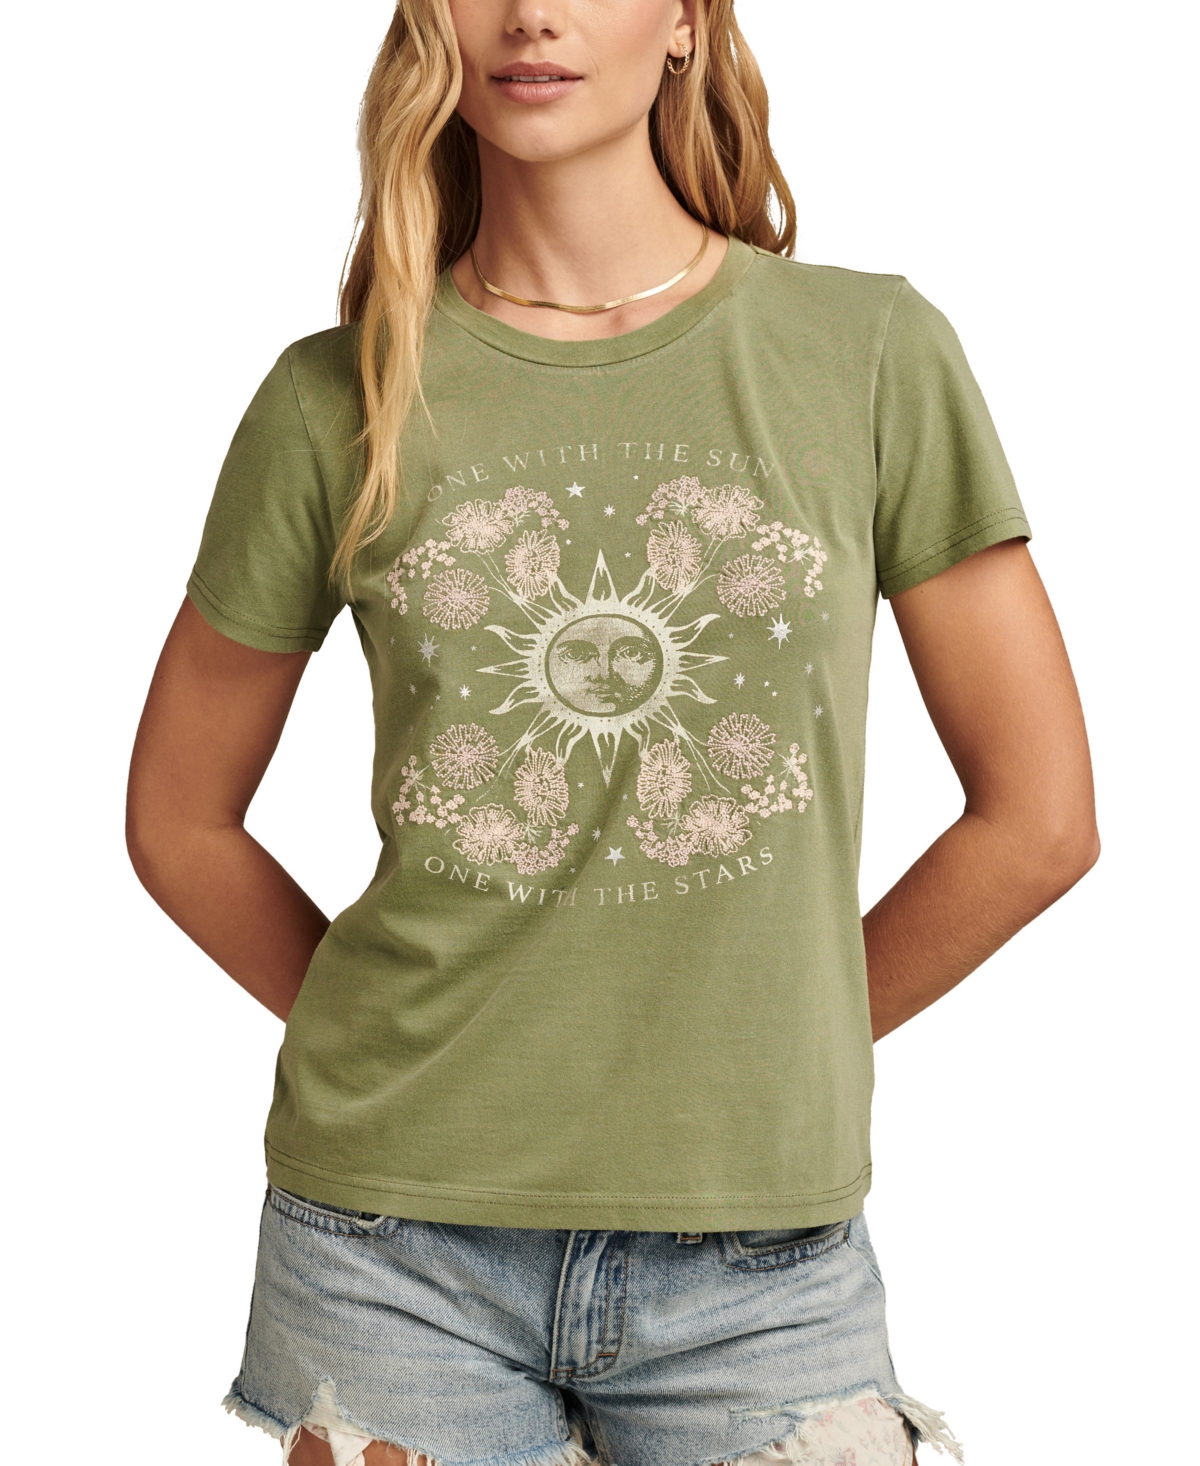 Women's One With The Stars Classic Cotton Crewneck T-Shirt - Olivine